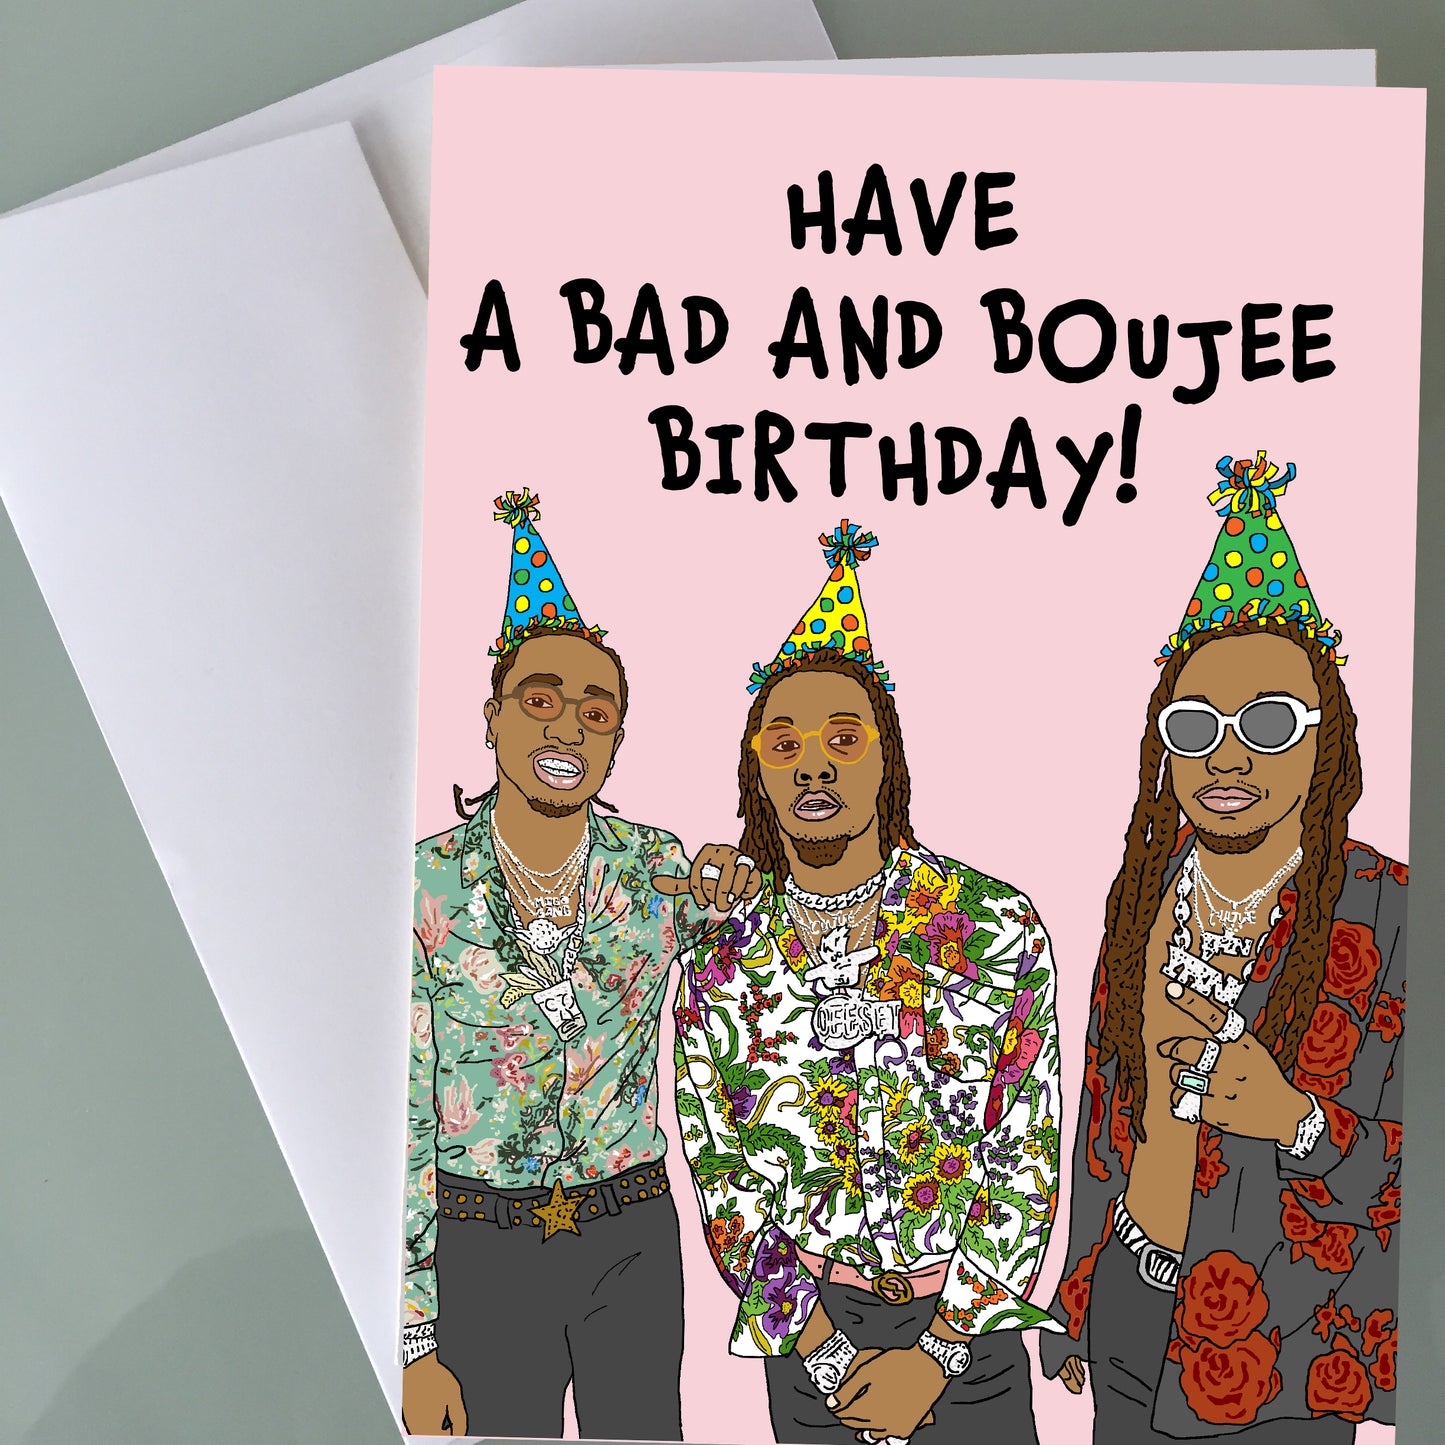 Migos Birthday Card - Bad and Boujee